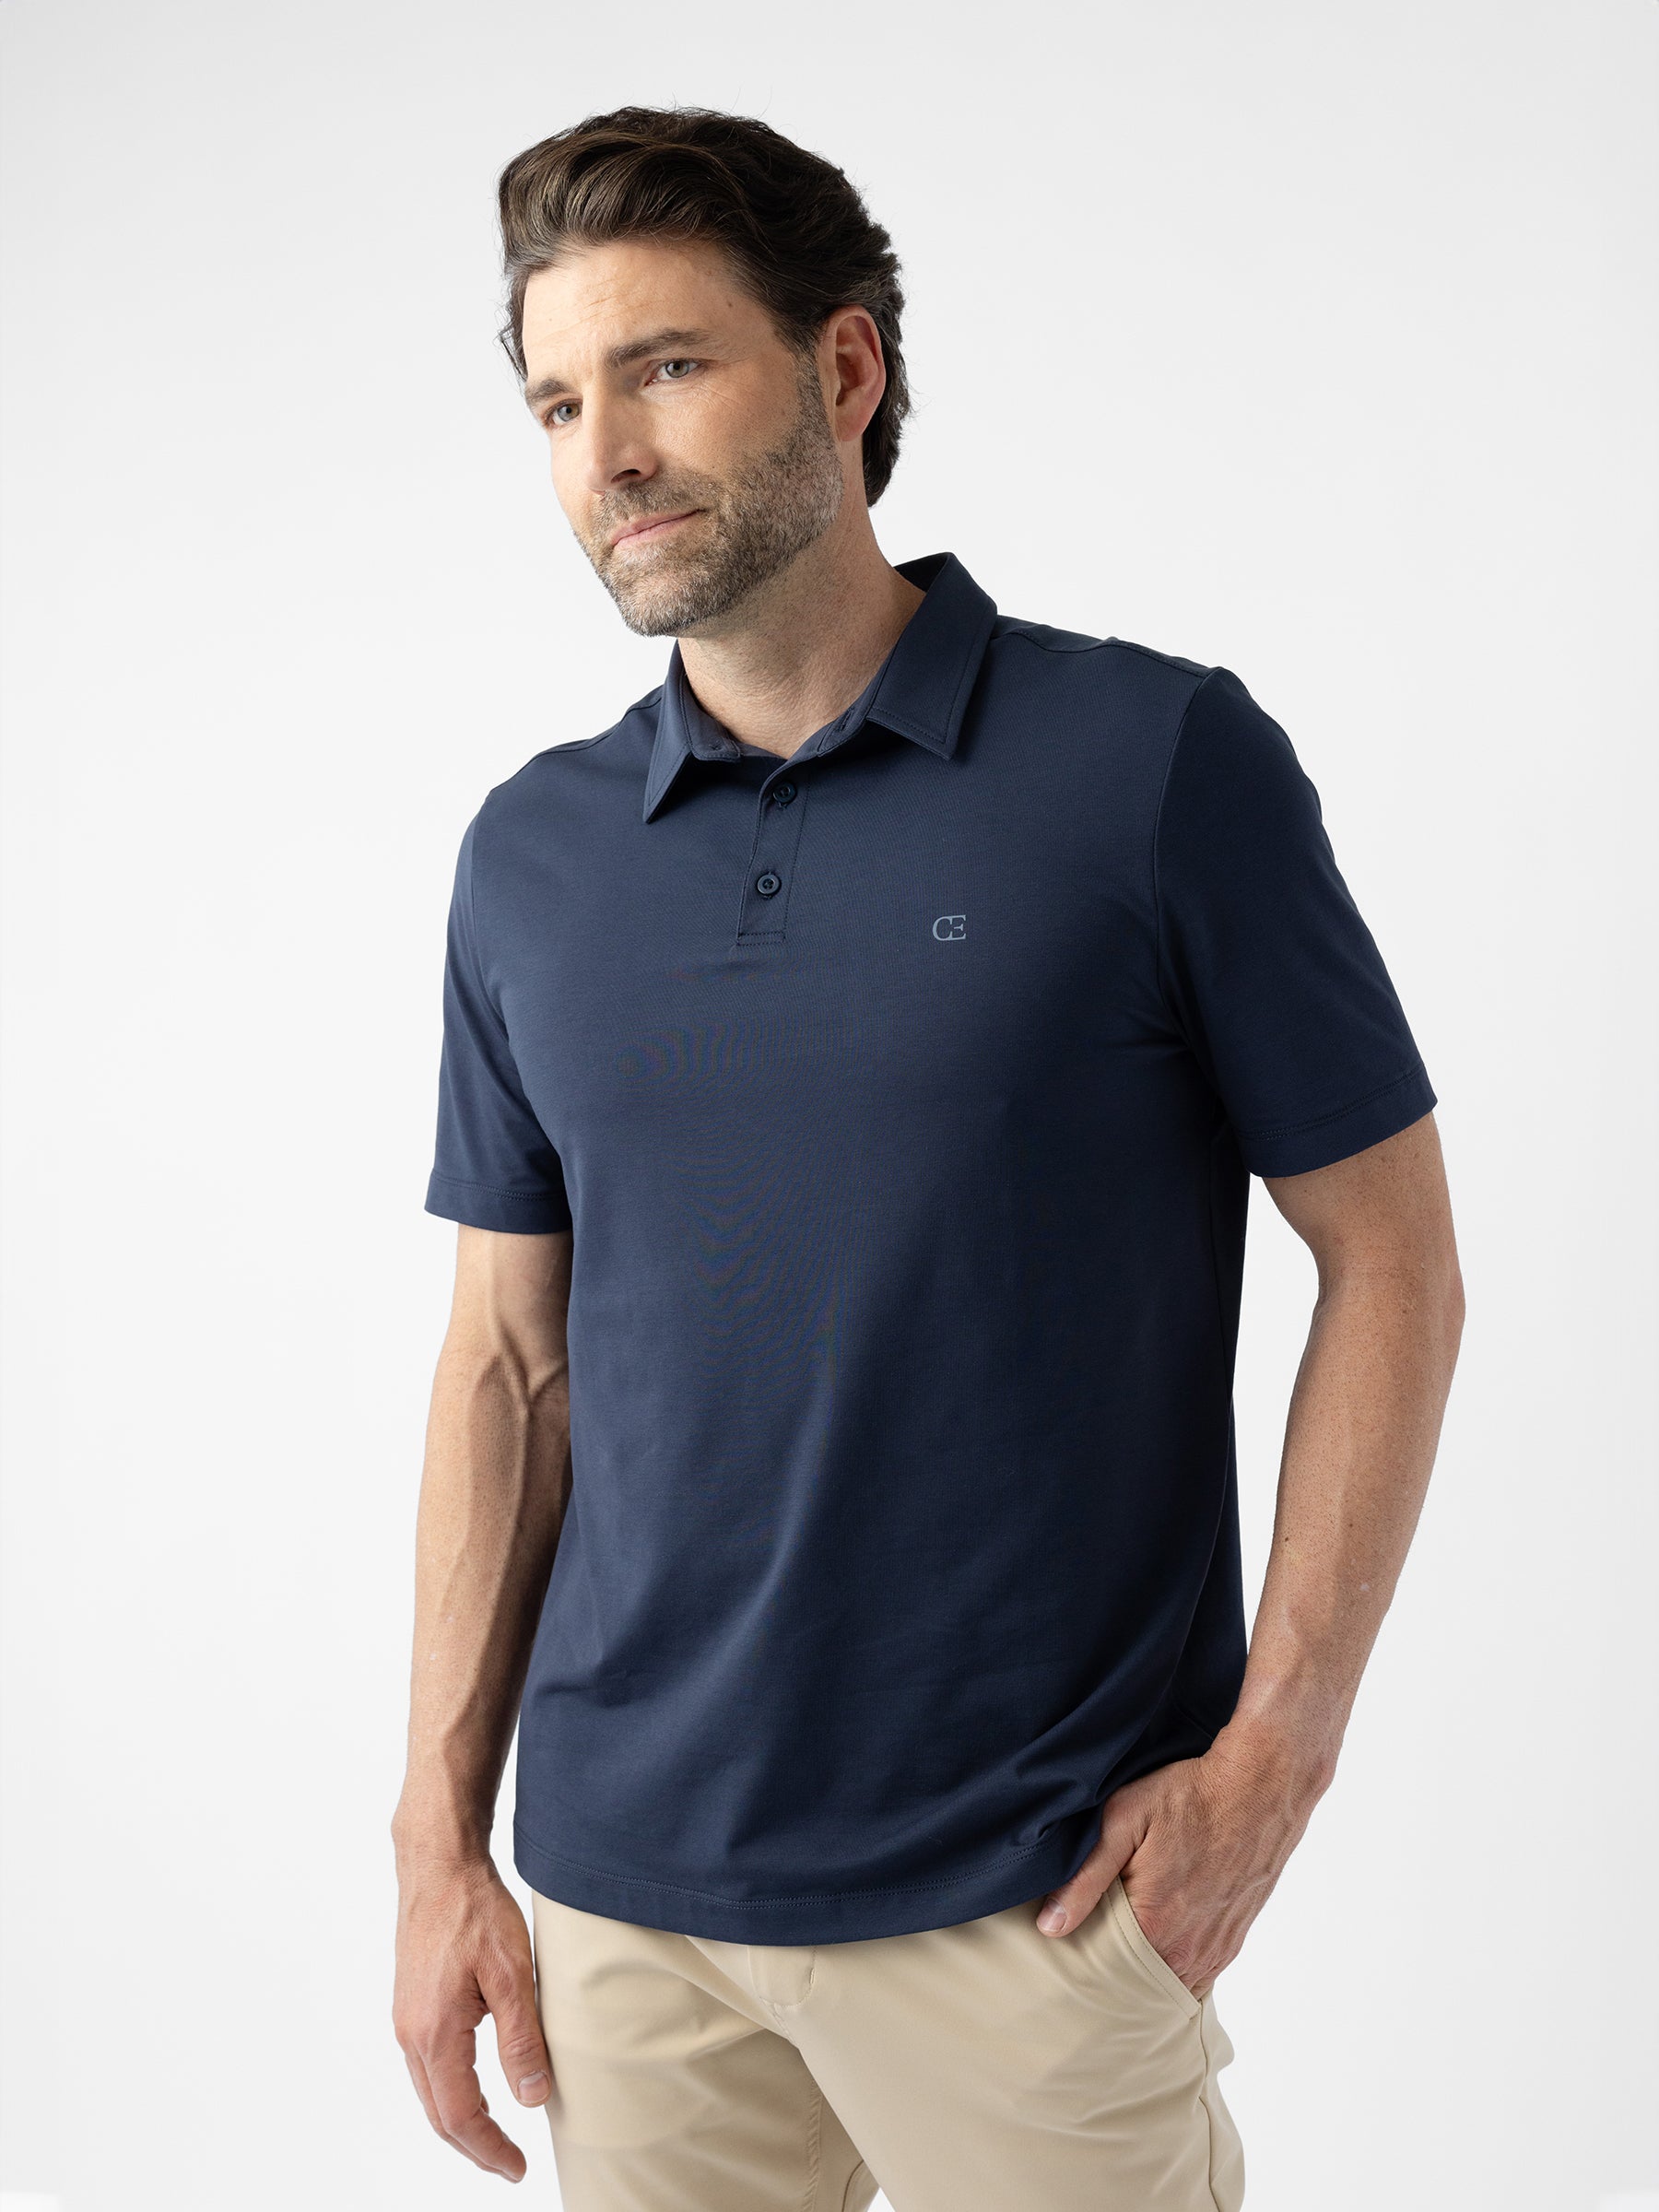 A man with a beard is wearing Cozy Earth's Men's Everyday Polo in dark navy and light beige pants. He is standing against a plain white background with one hand in his pocket, looking slightly to his left. |Color:Eclipse